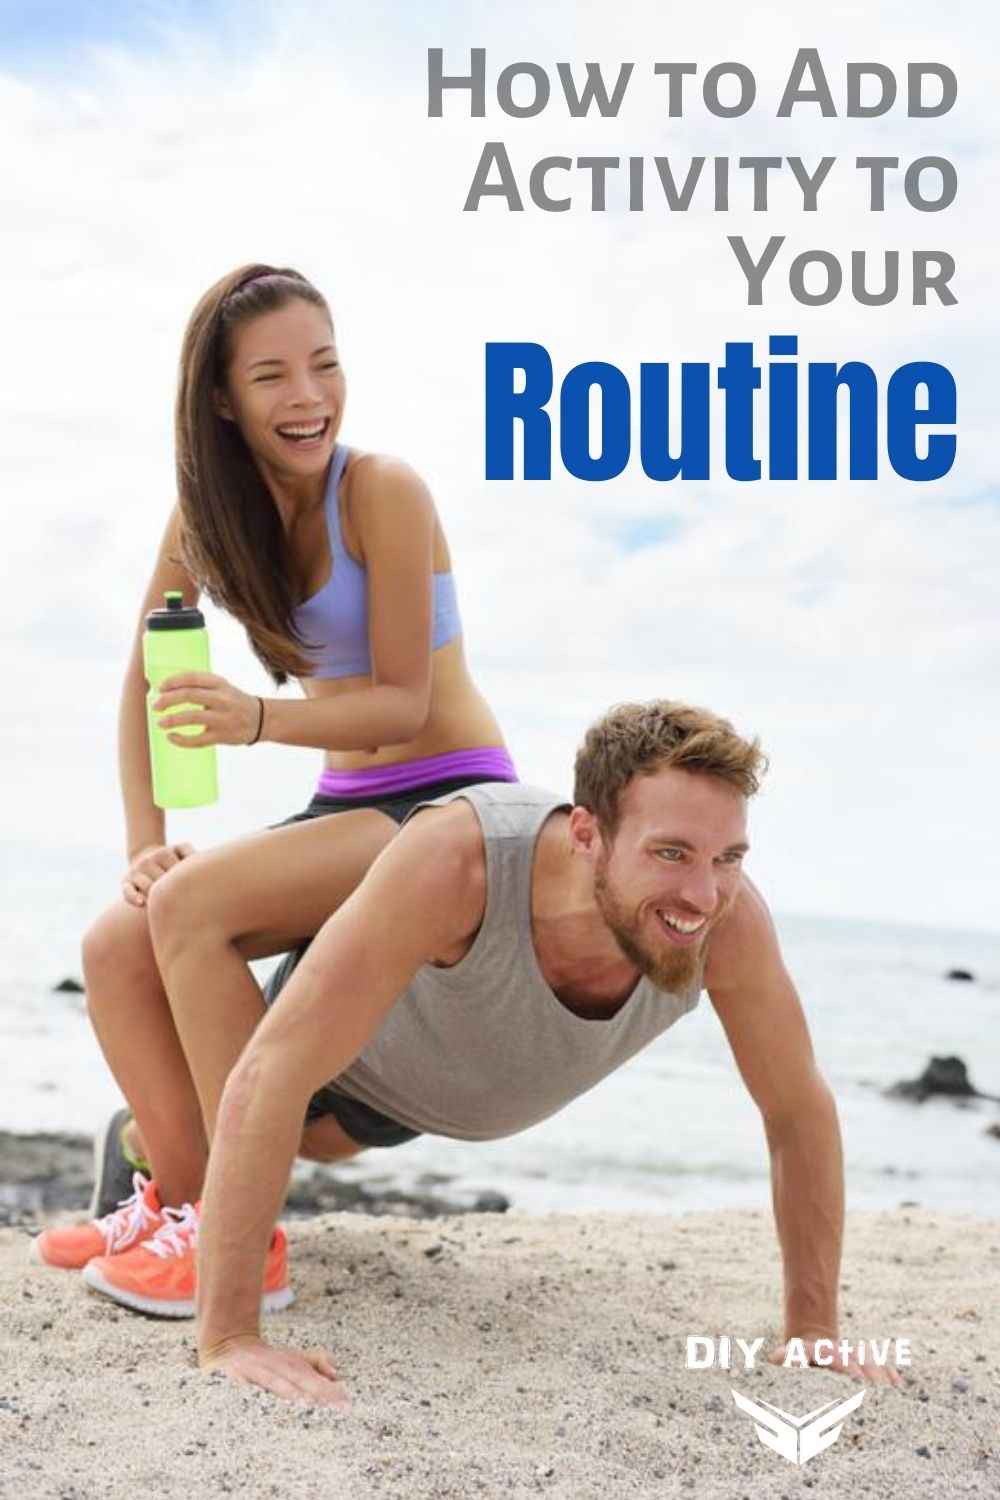 How to Add Activity to Your Routine Starting Today